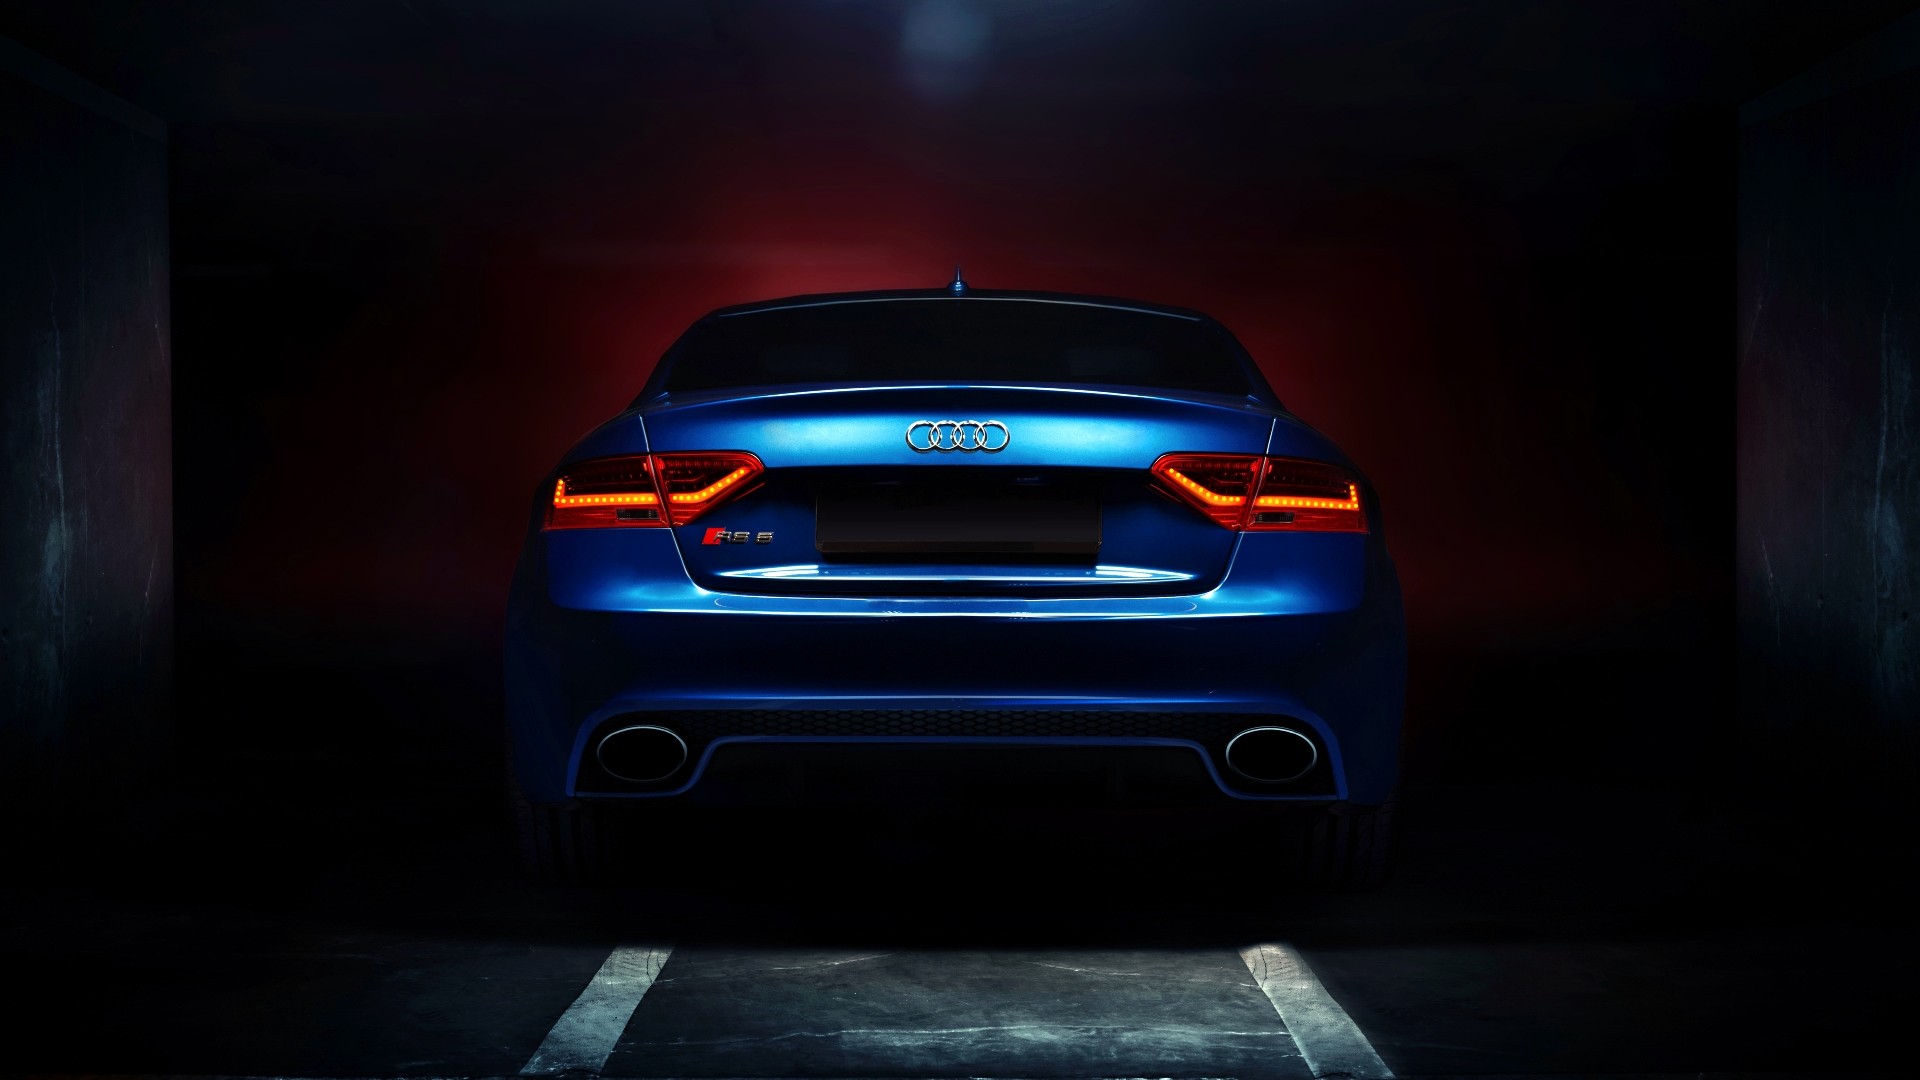 Best Mobile Audi Rs5 Backgrounds